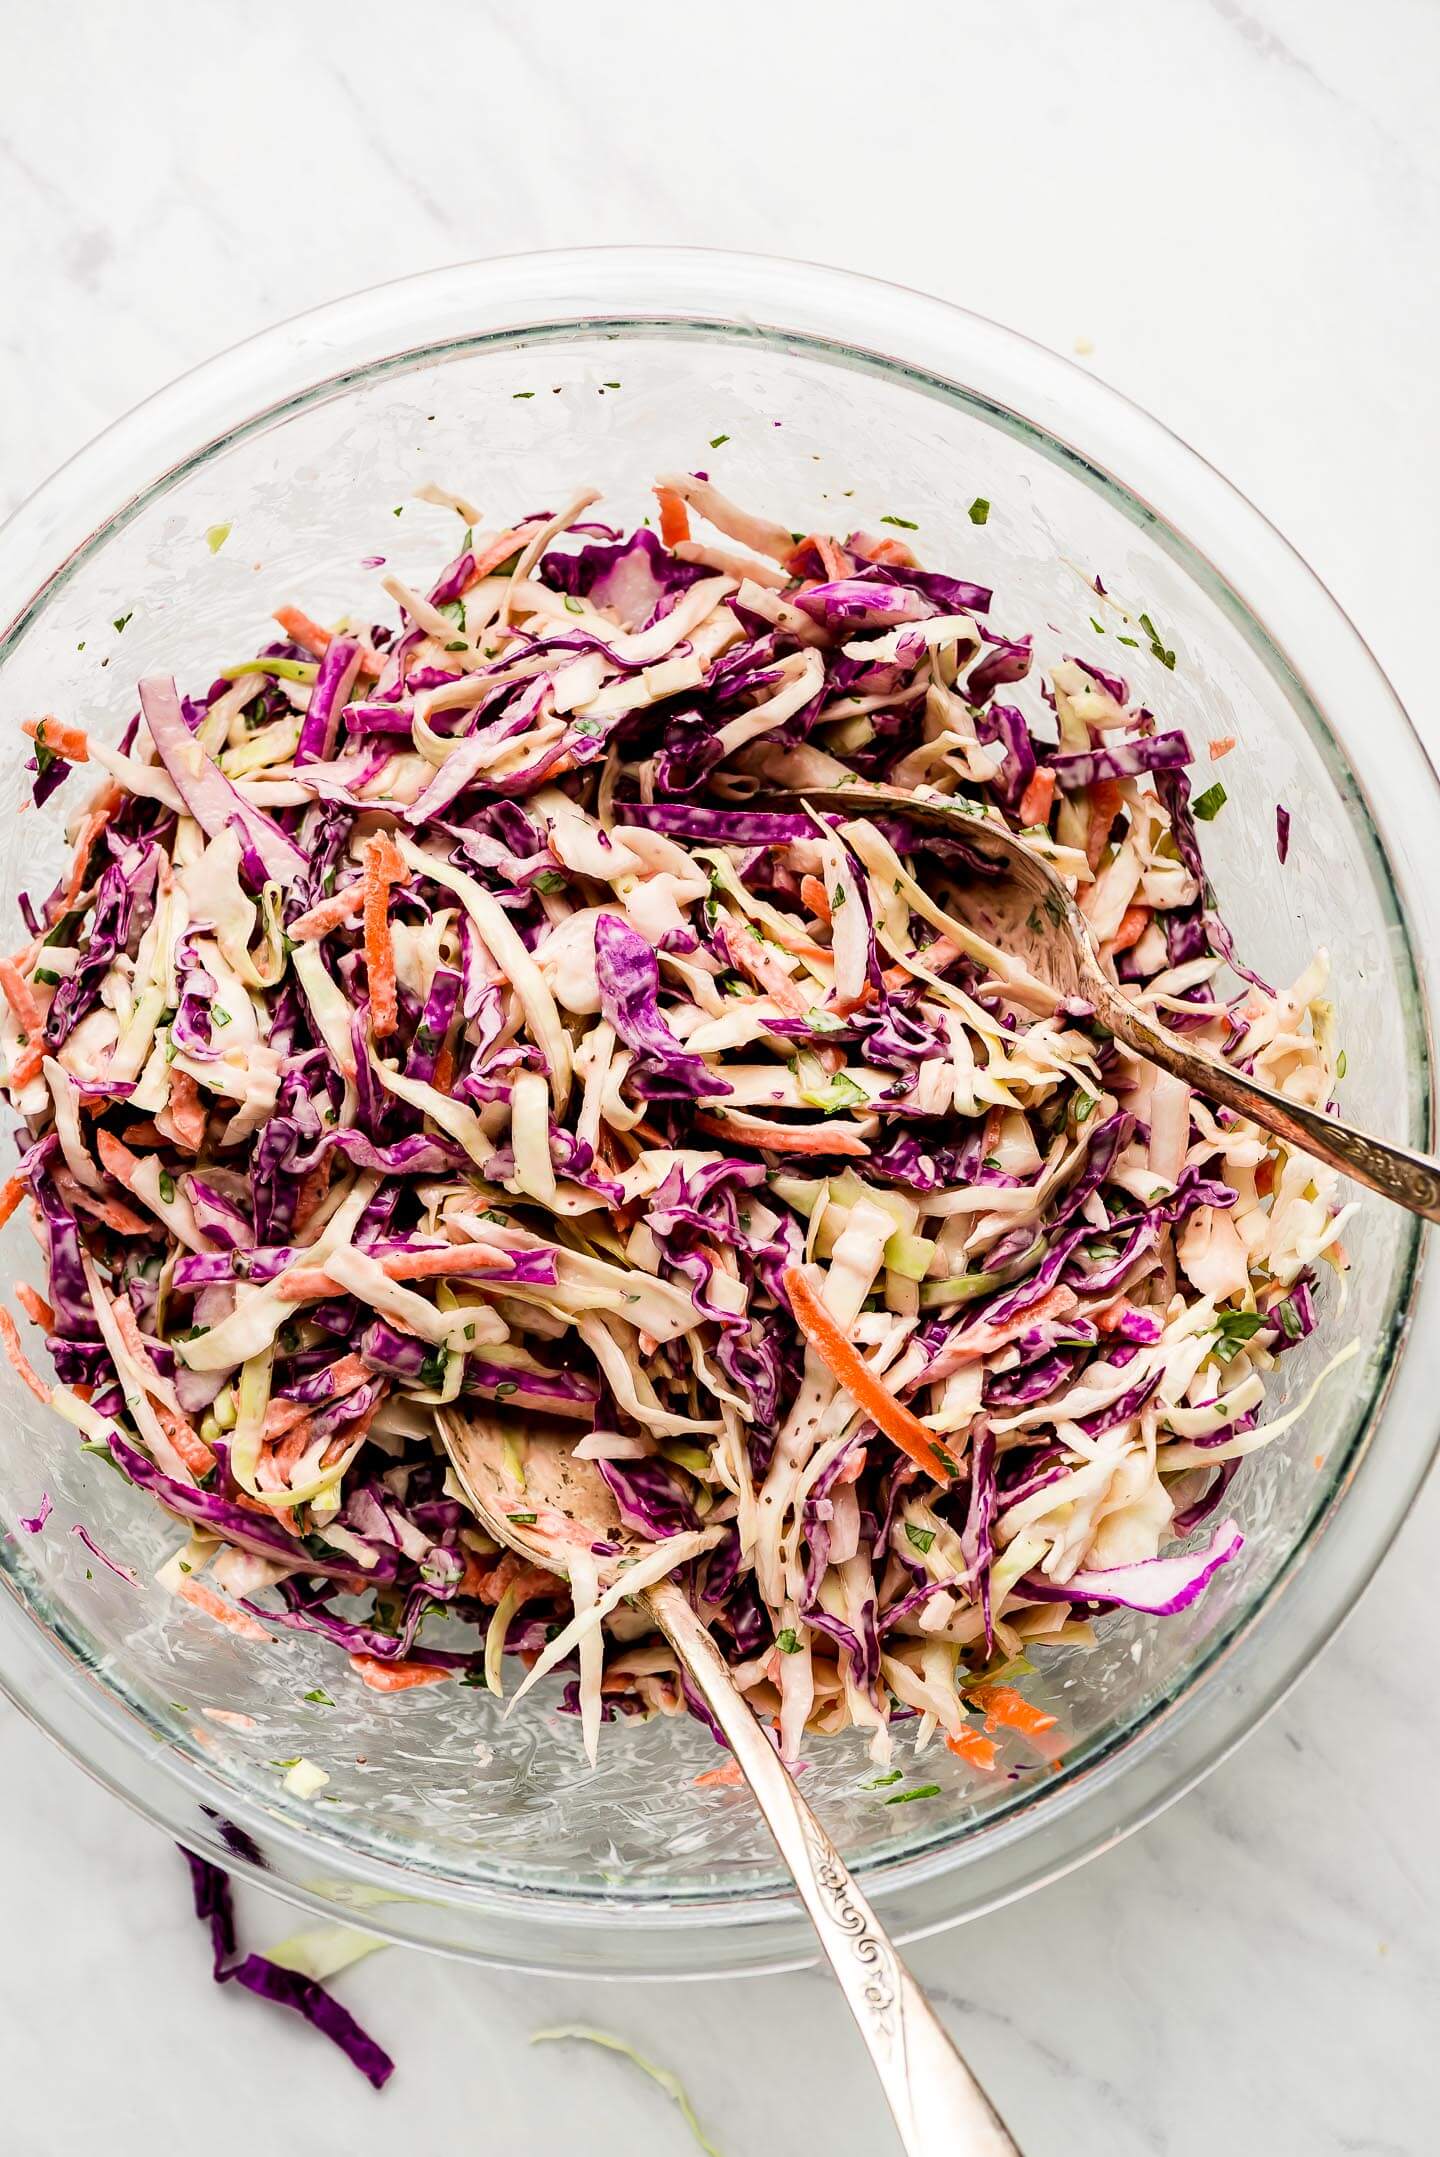 A glass mixing bowl of Coleslaw with two serving spoons.